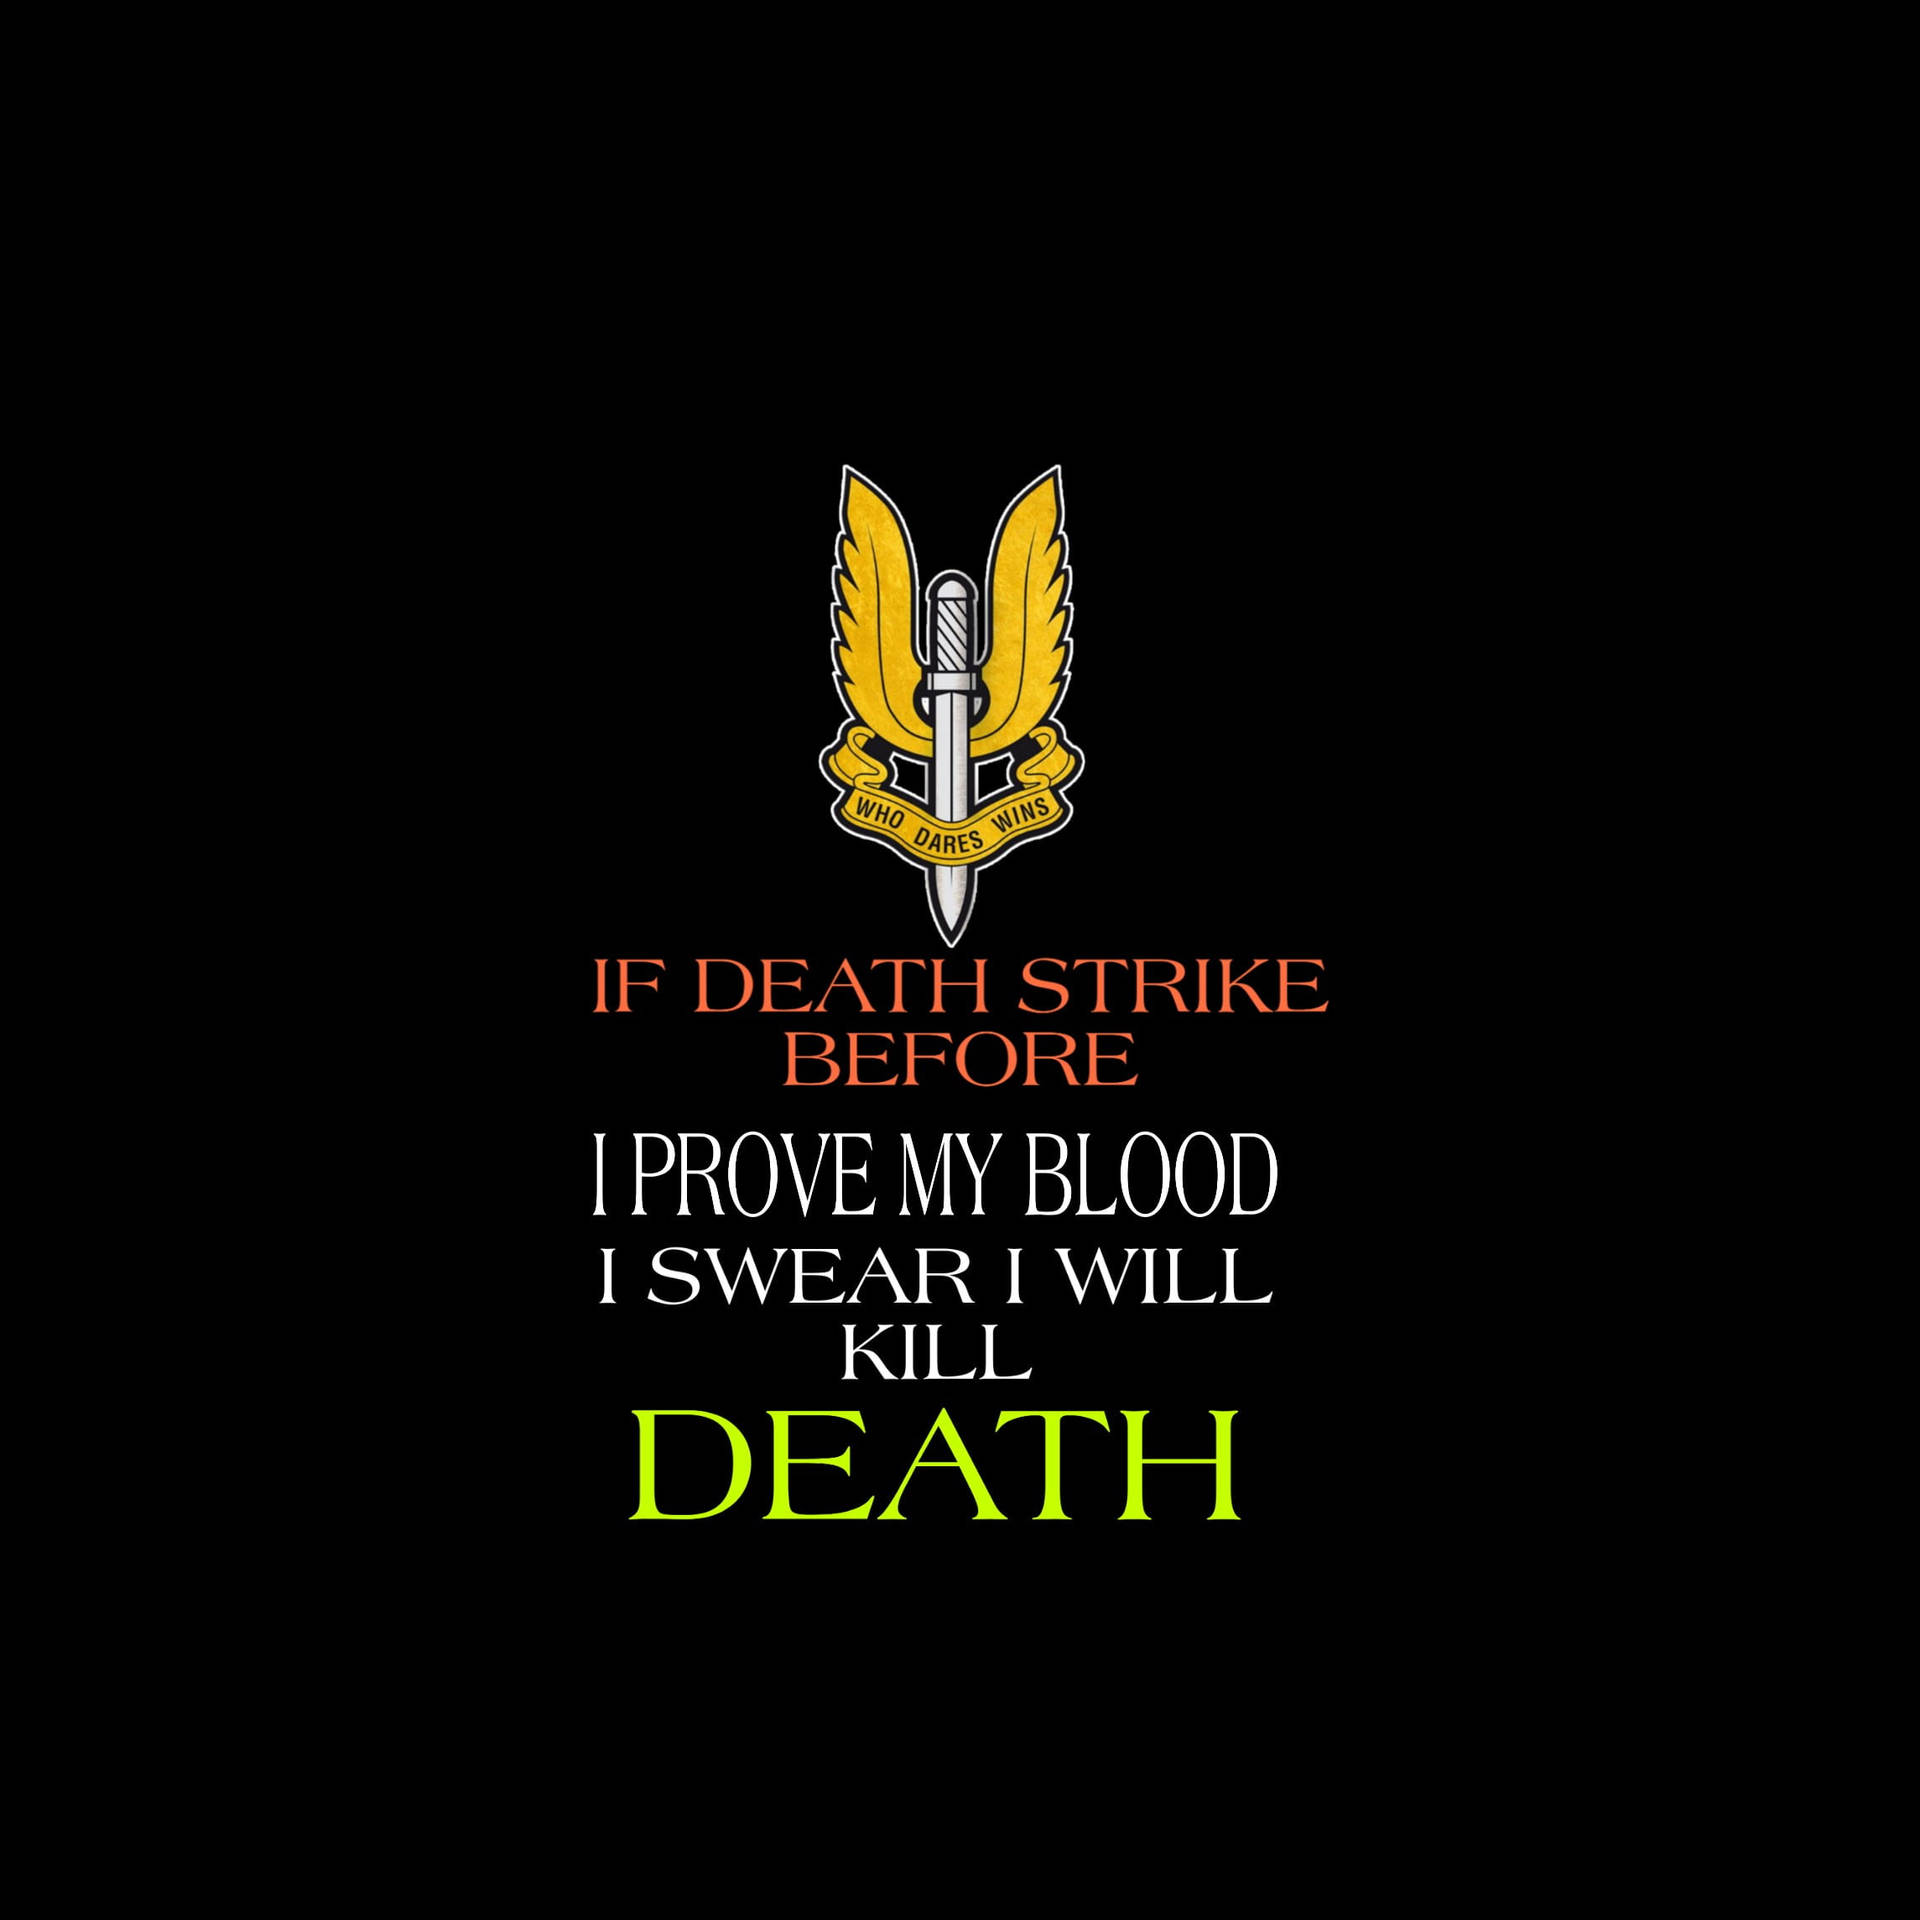 Indian Army Logo Courage In Death Quote Background